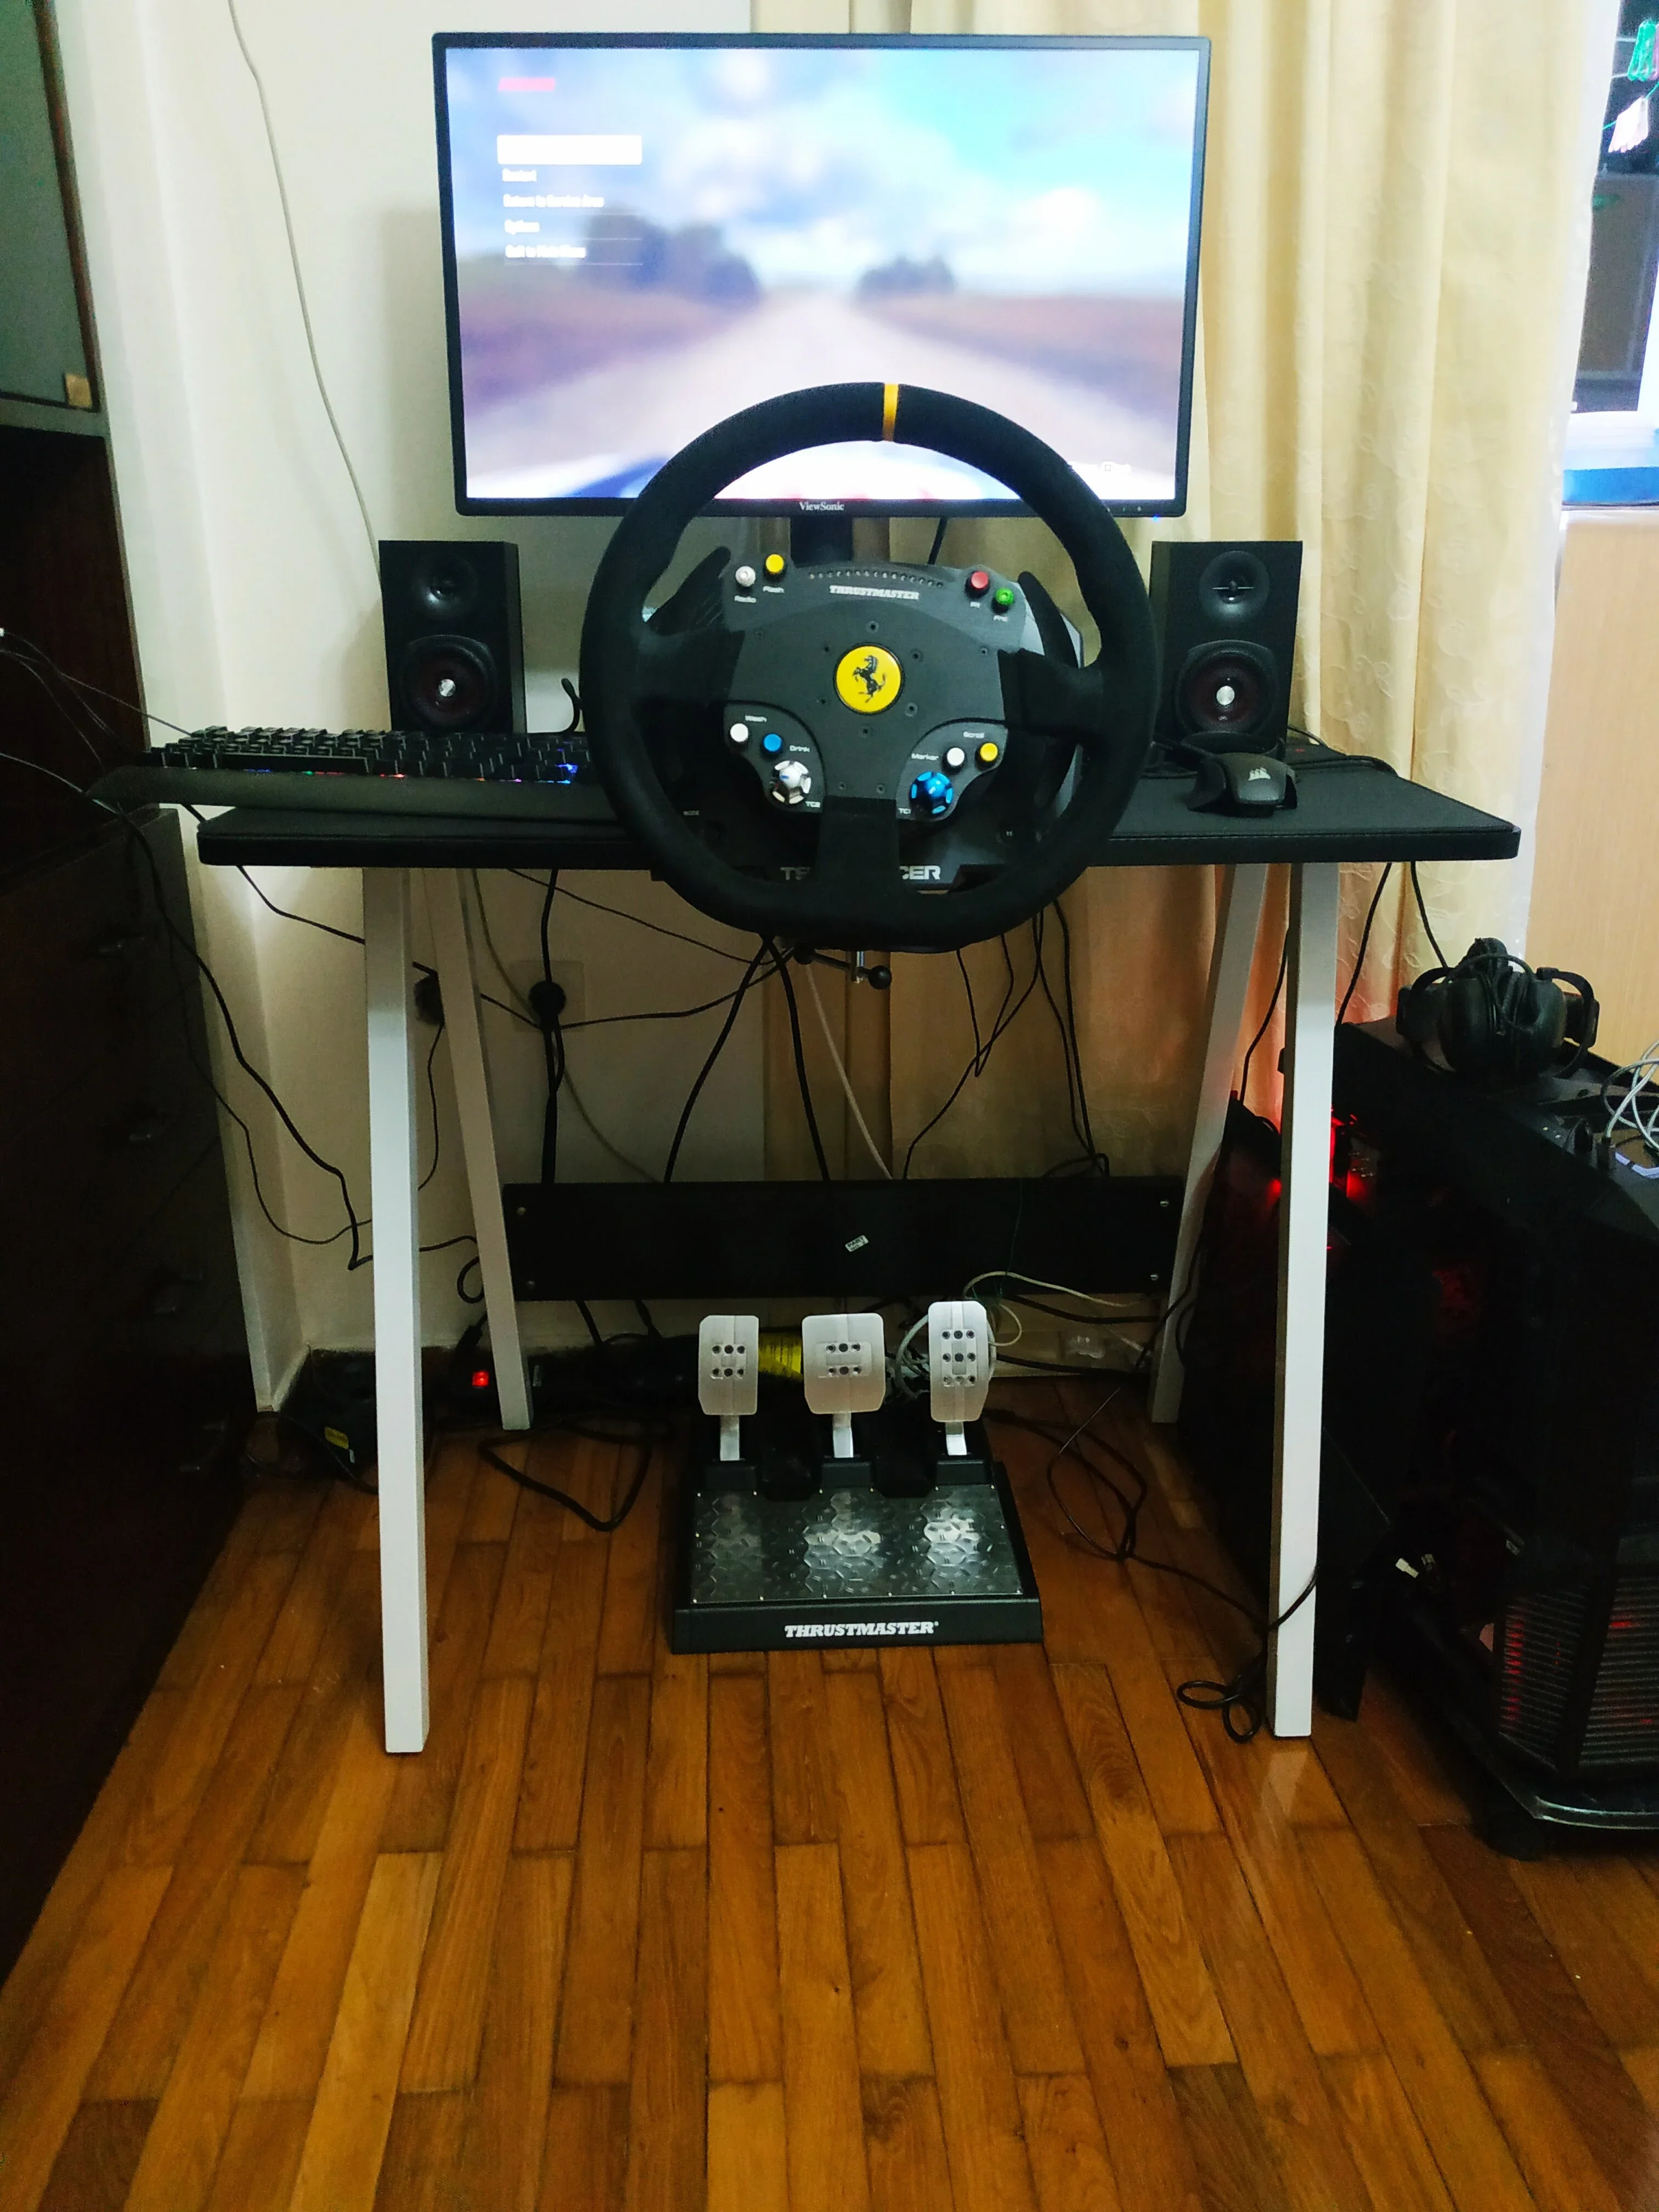 More information about "Thrustmaster TS-PC Racer 488 Ferrari Challenge Edition + Thrustmaster T-LCM Pedals + Shh Shifter"